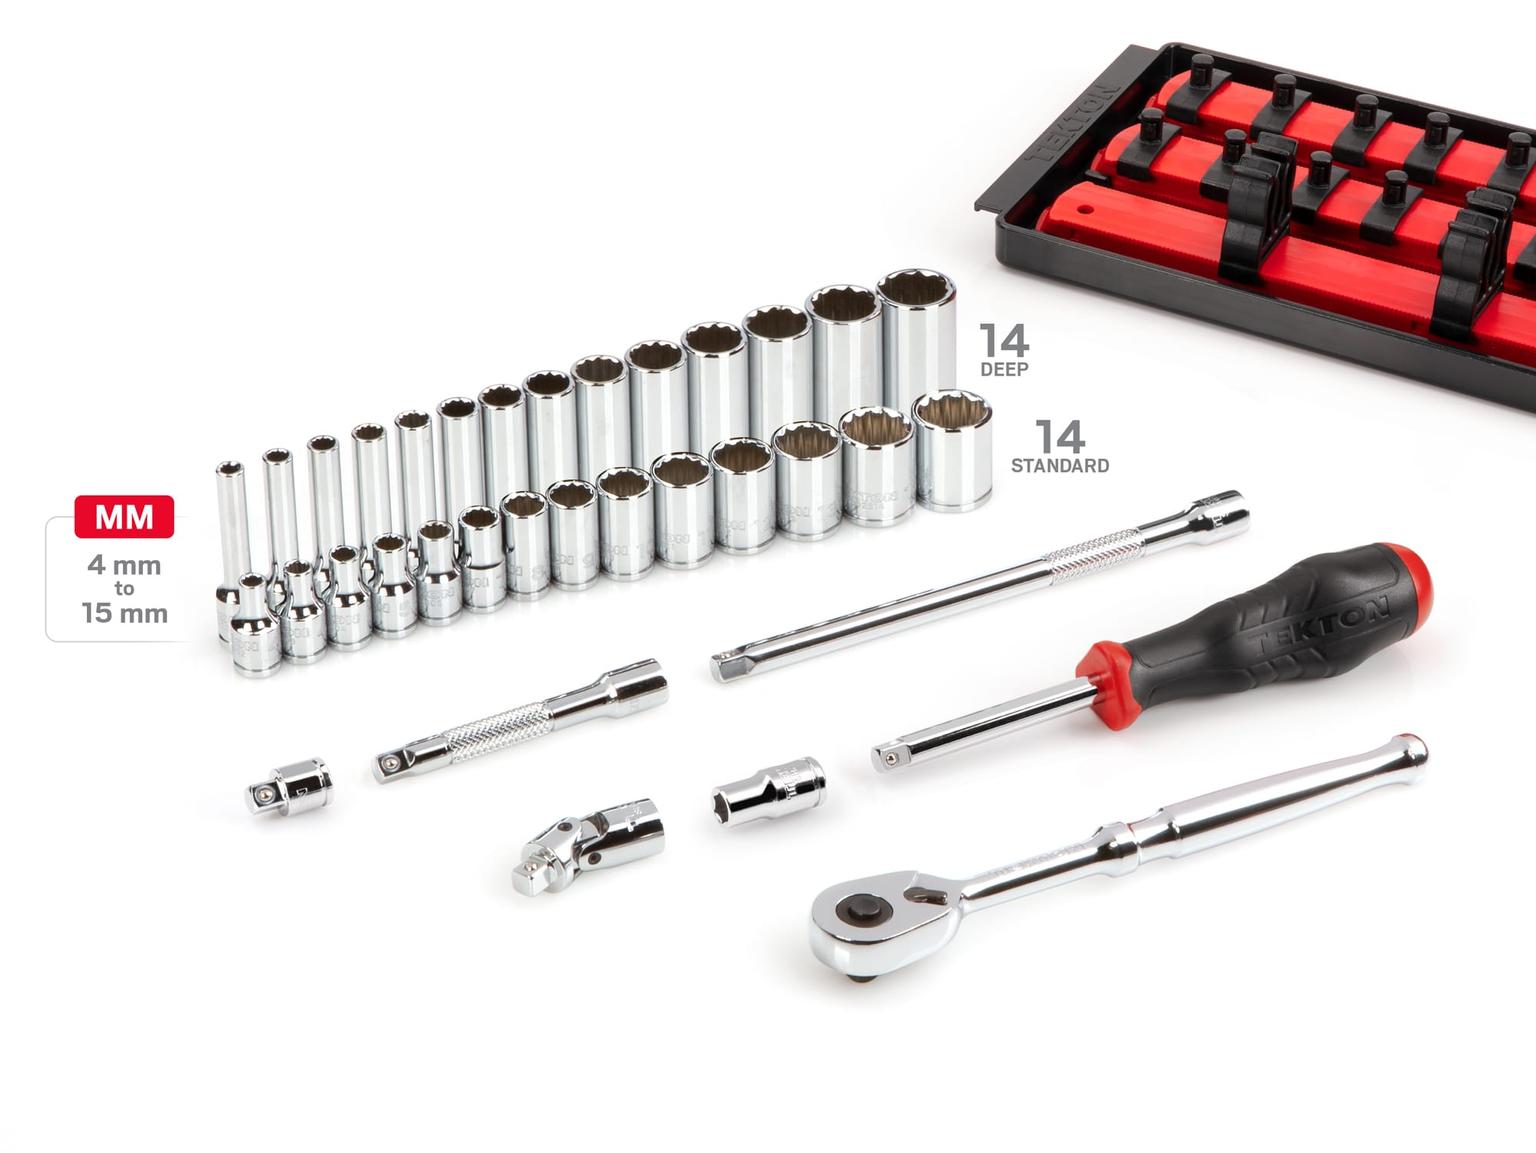 TEKTON SKT03202-T 1/4 Inch Drive 12-Point Socket and Ratchet Set with Rails, 35-Piece (4-15 mm)